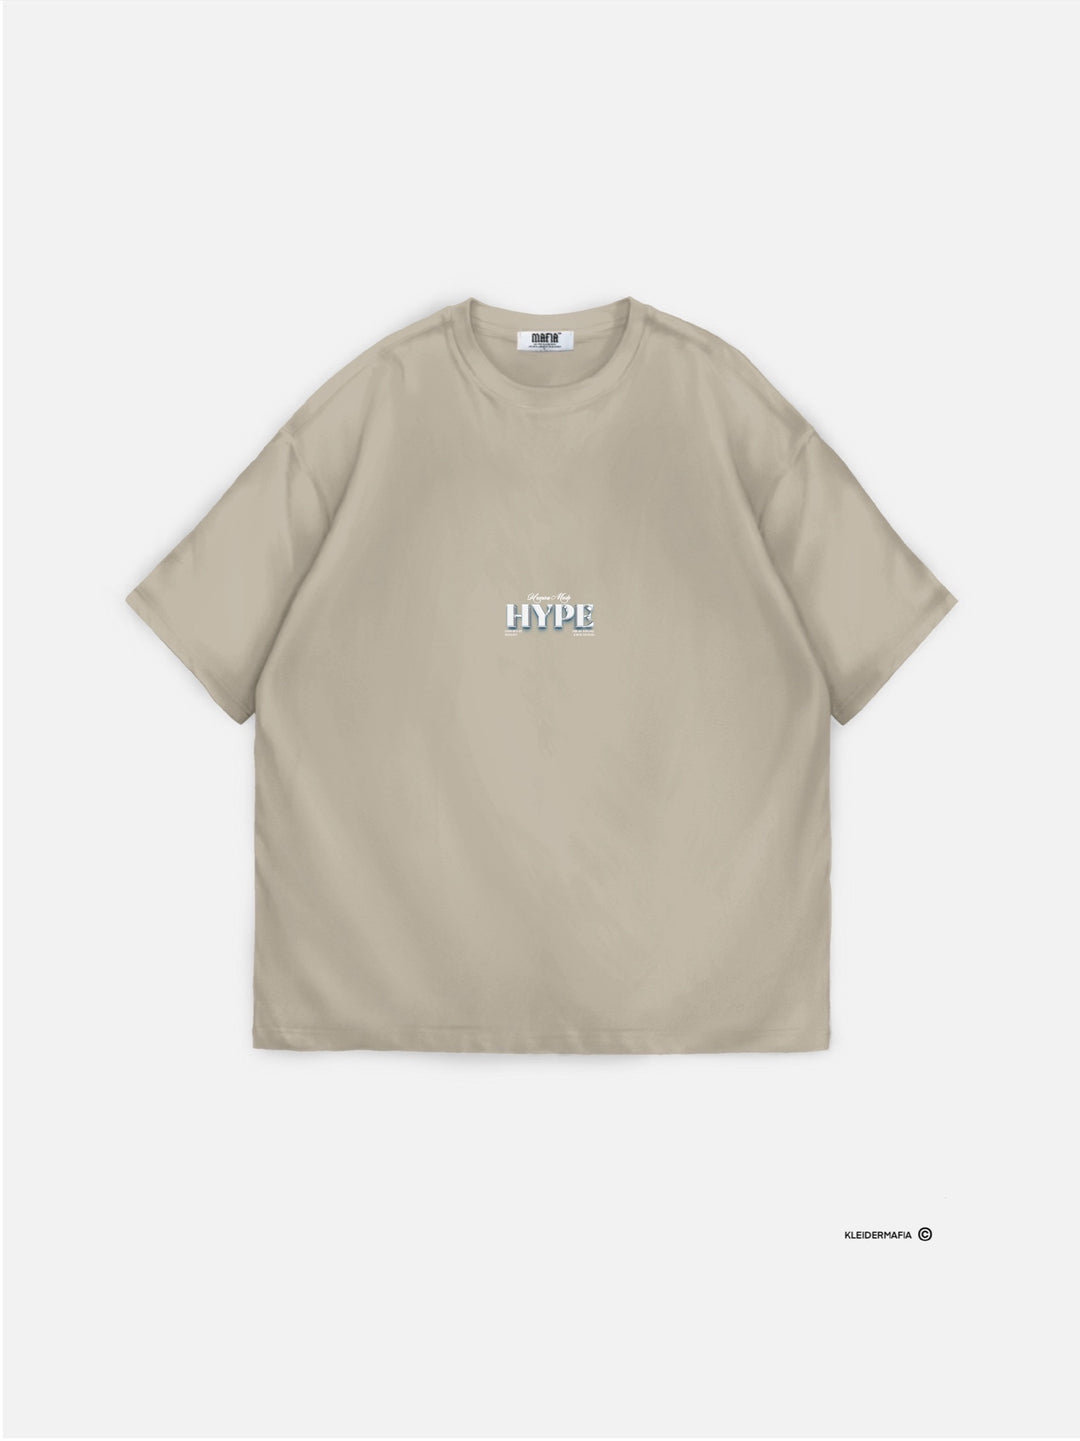 Oversize Hype T-Shirt - Silver Lining